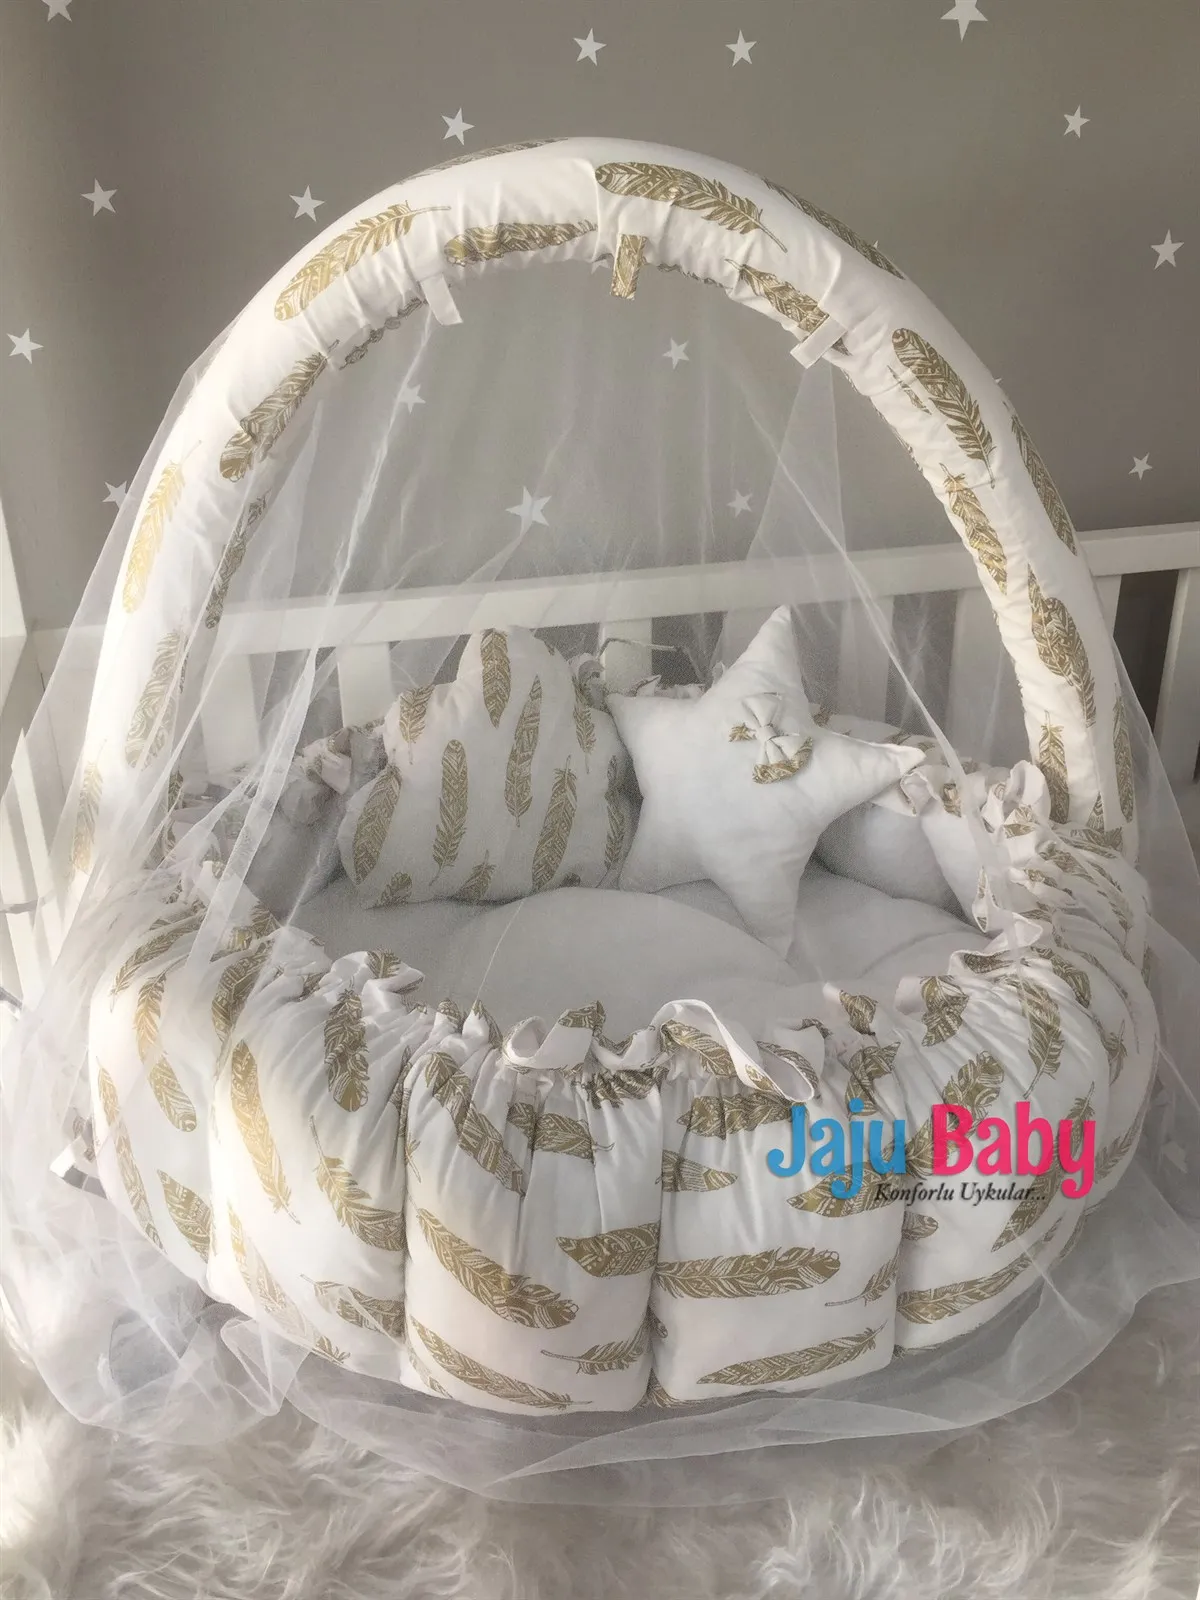 Jaju Baby Handmade Gold Feather Pattern Design Lux Play Mat Babynest Mosquito Net Tulle Toy Apparatus Set